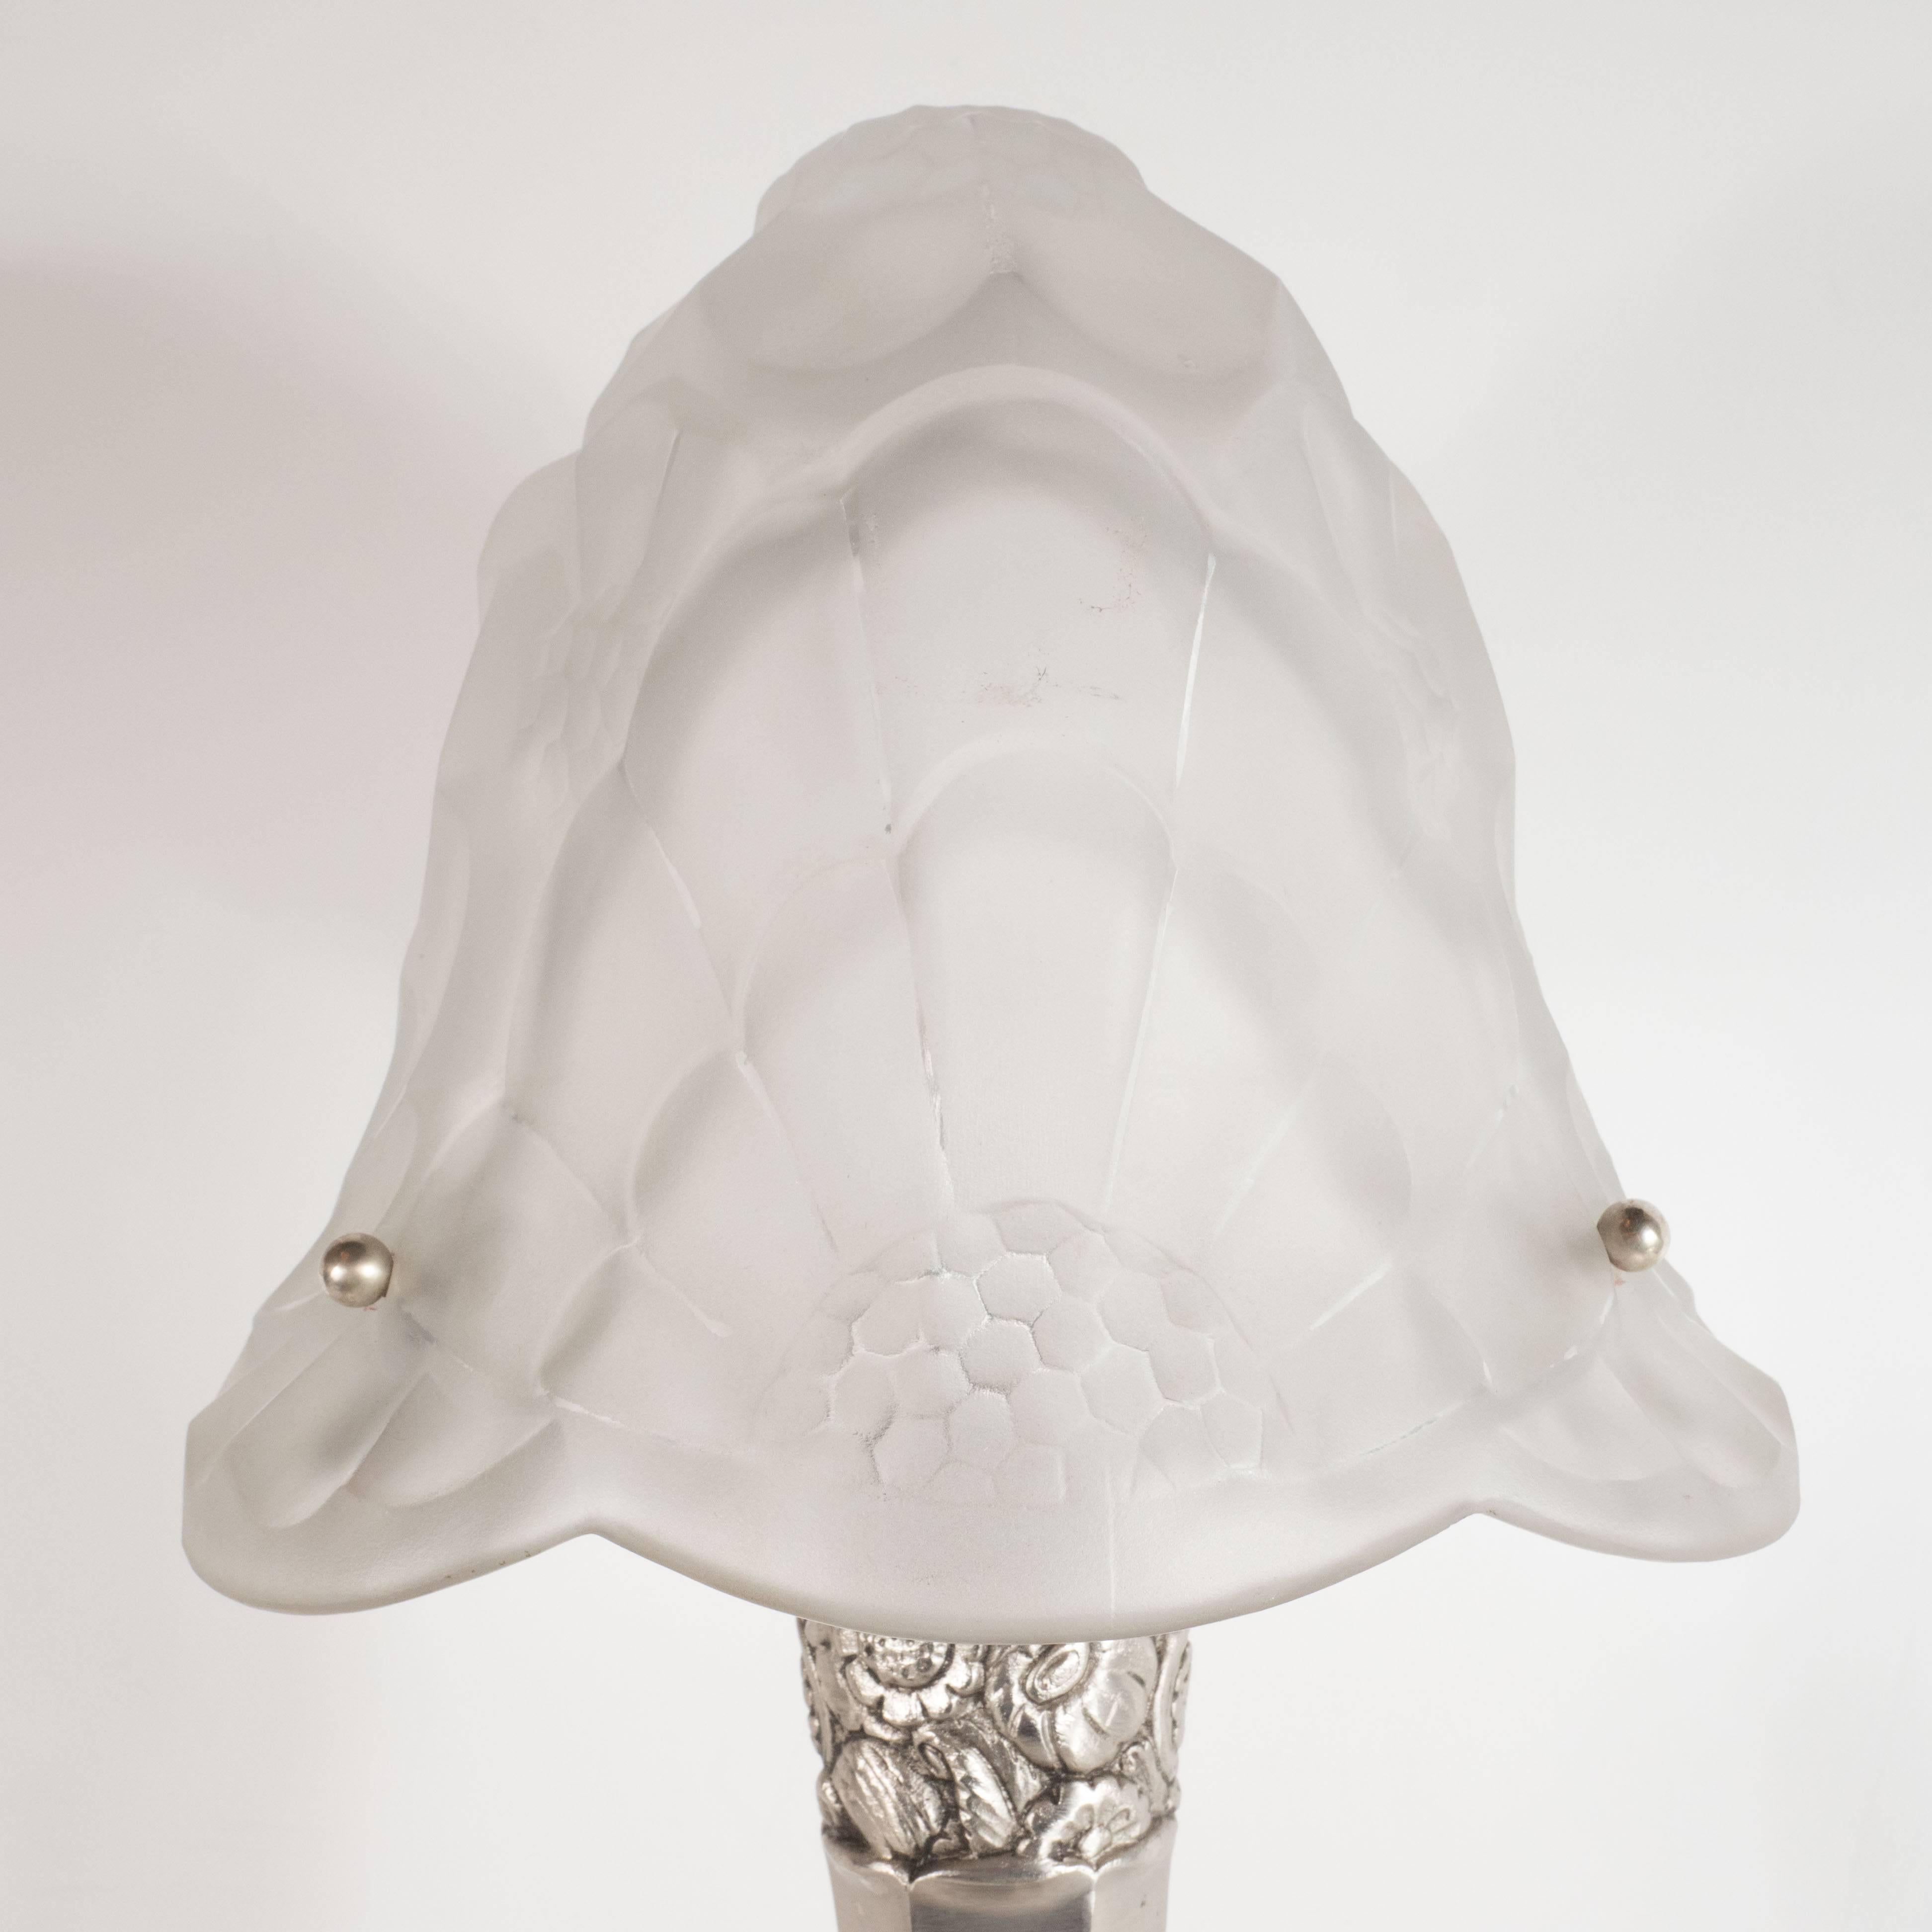 Mid-20th Century French Art Deco Frosted Glass Shade on Silvered Bronze Base Signed by Degue